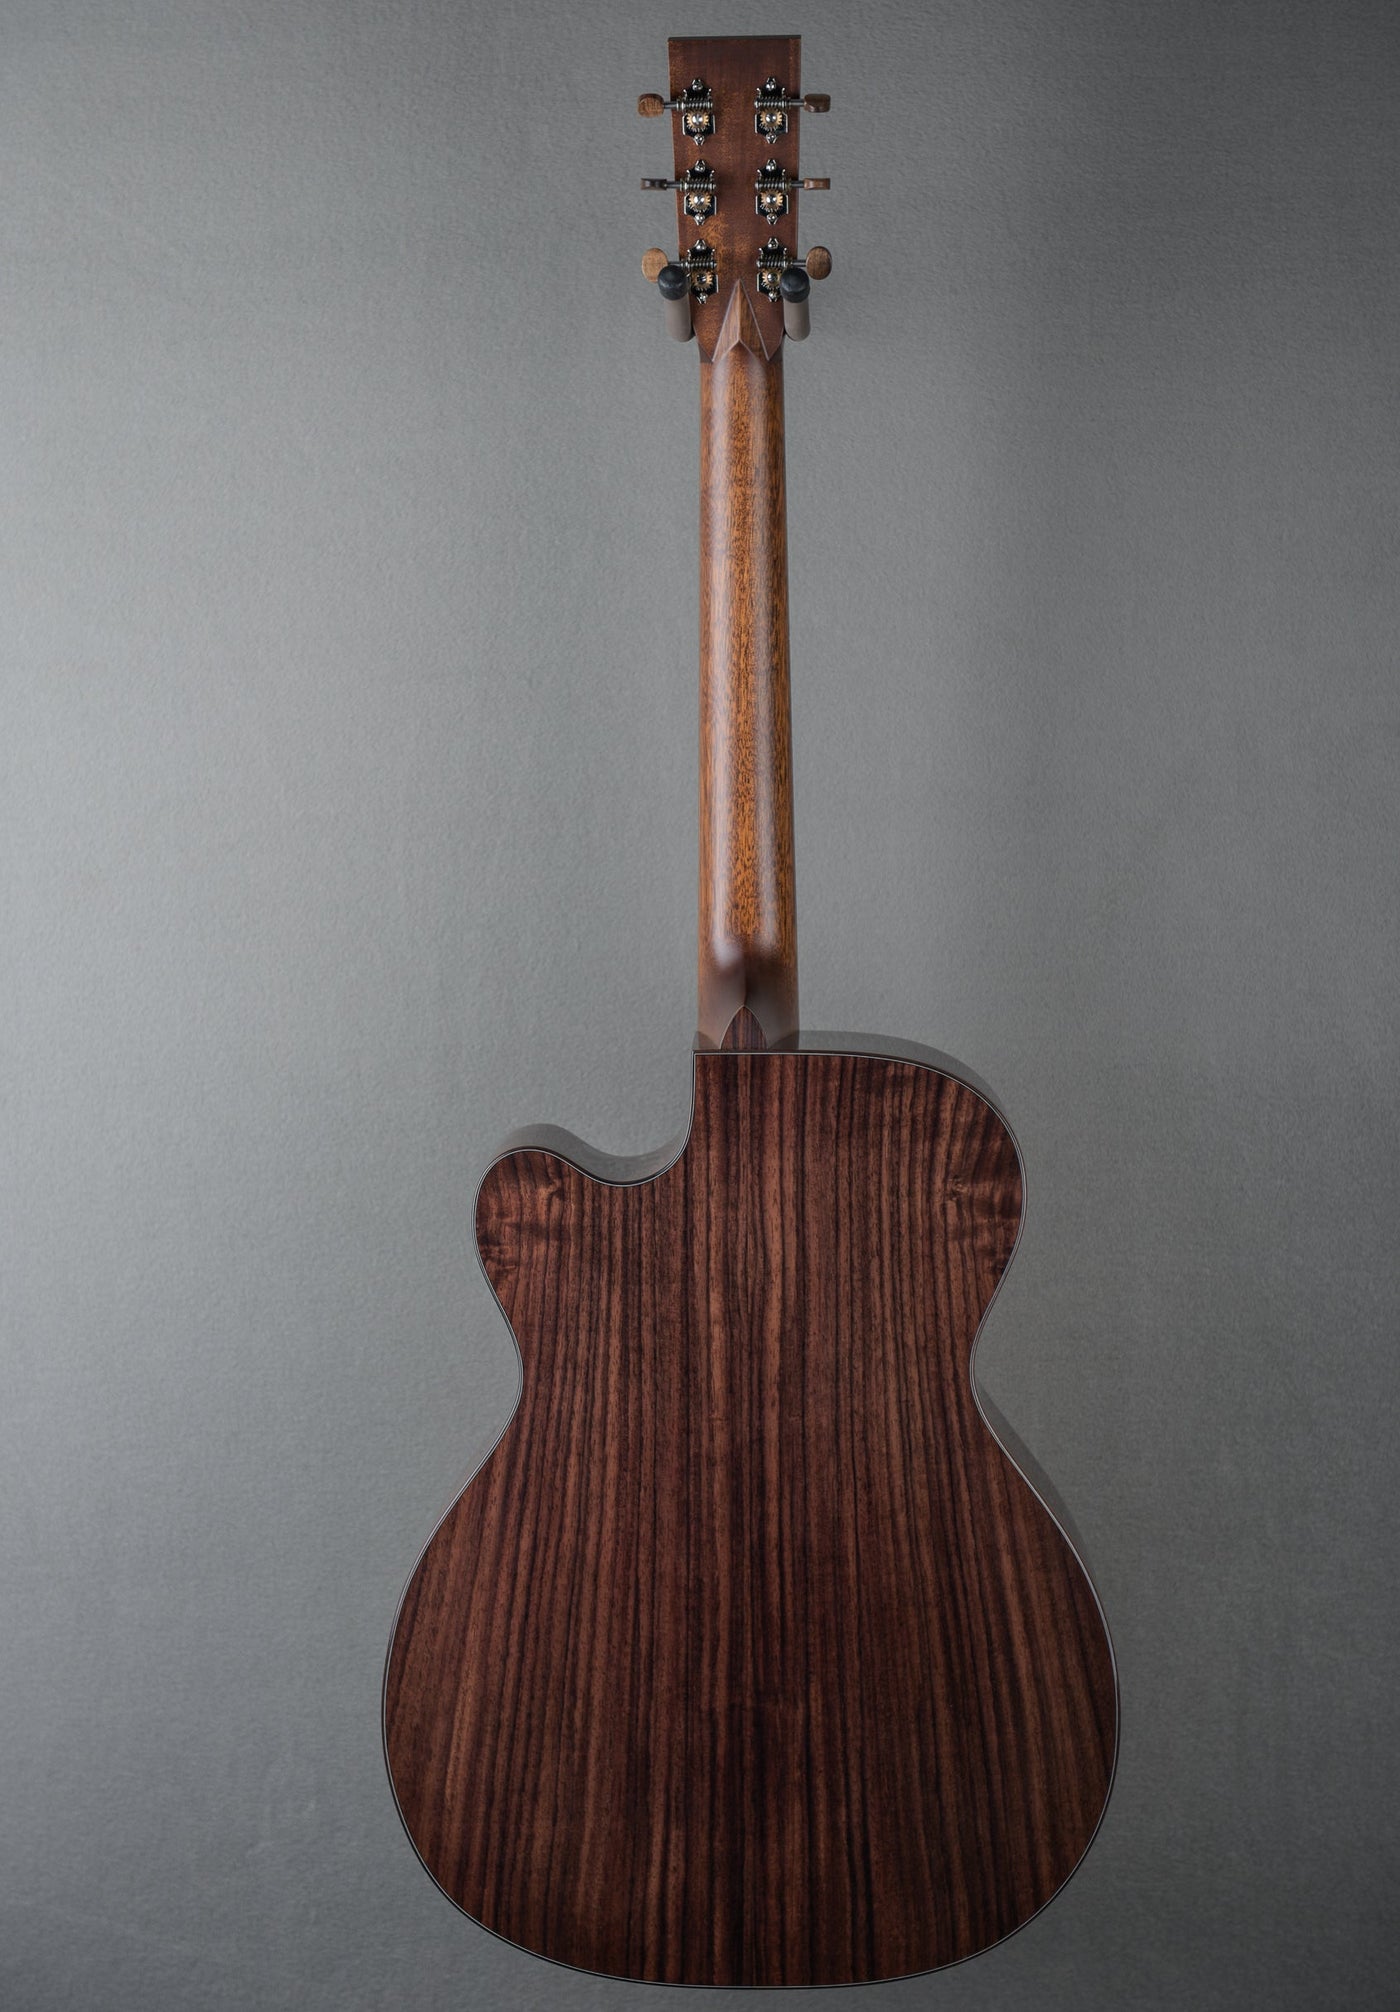 OMC, East Indian Rosewood/AAA Sitka Spruce